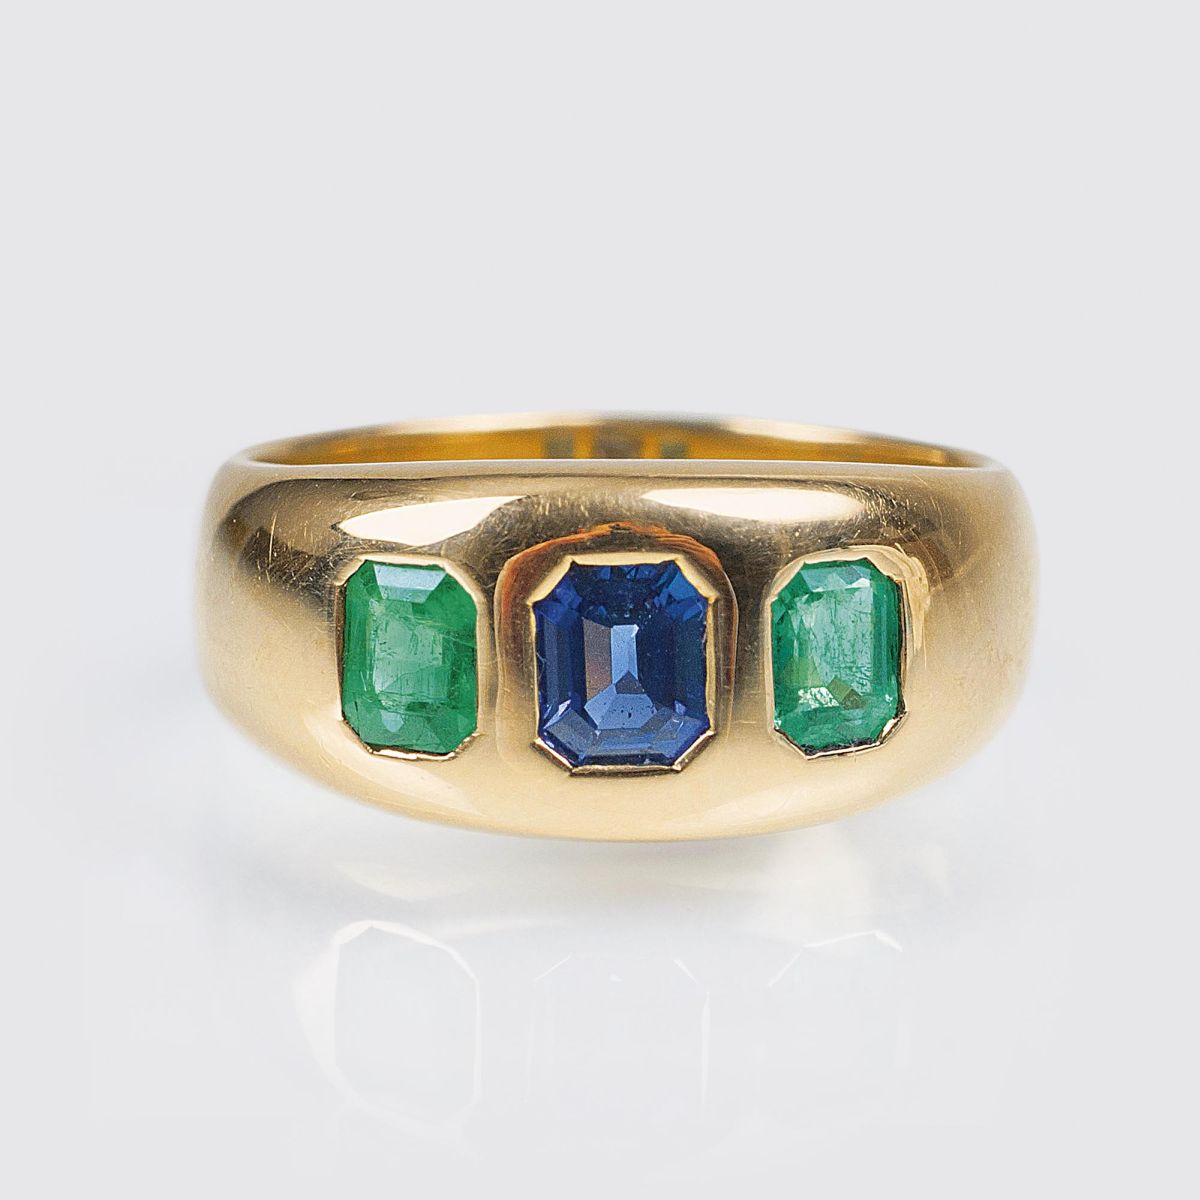 A Gold Ring with Emeralds and Sapphire